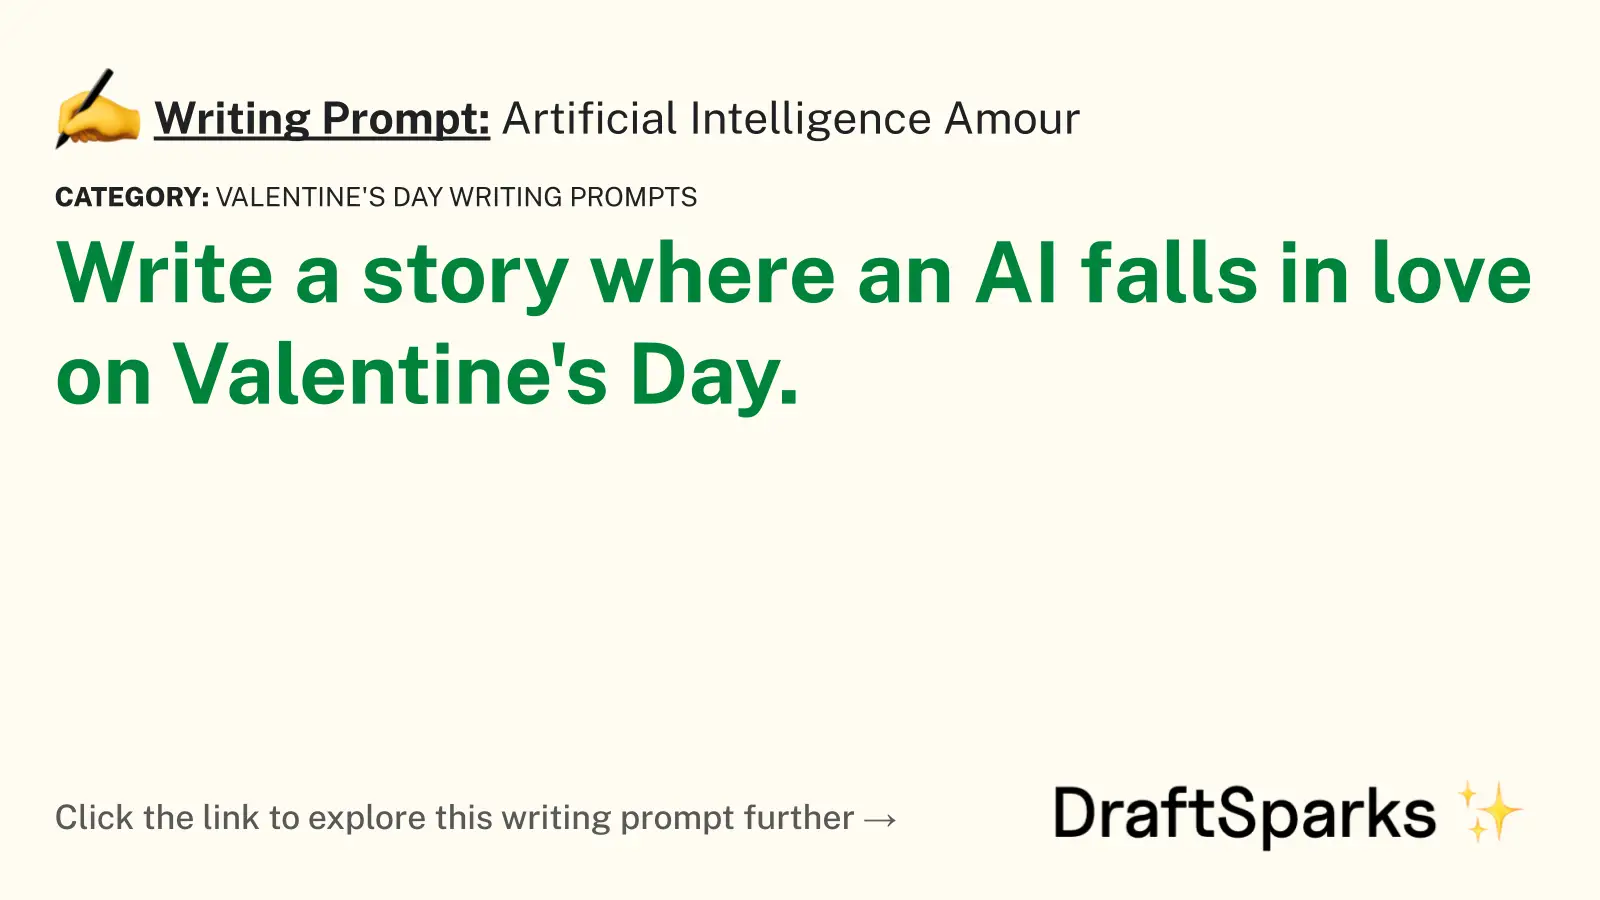 Artificial Intelligence Amour